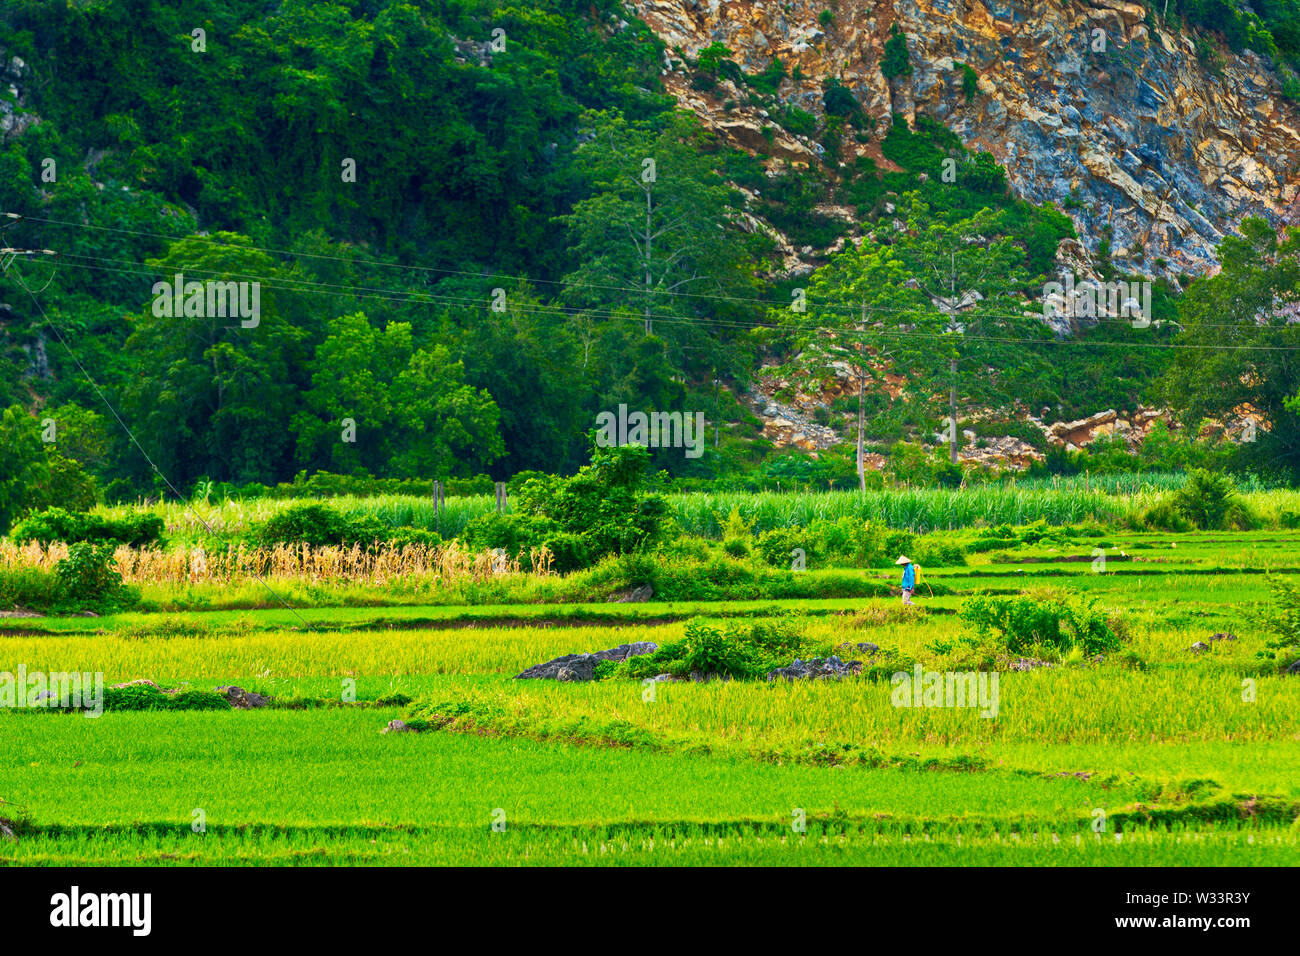 THANH HOA, VIETNAM - JULY 7, 2019: An unidentified farmer spraying insecticides on the fields. Stock Photo